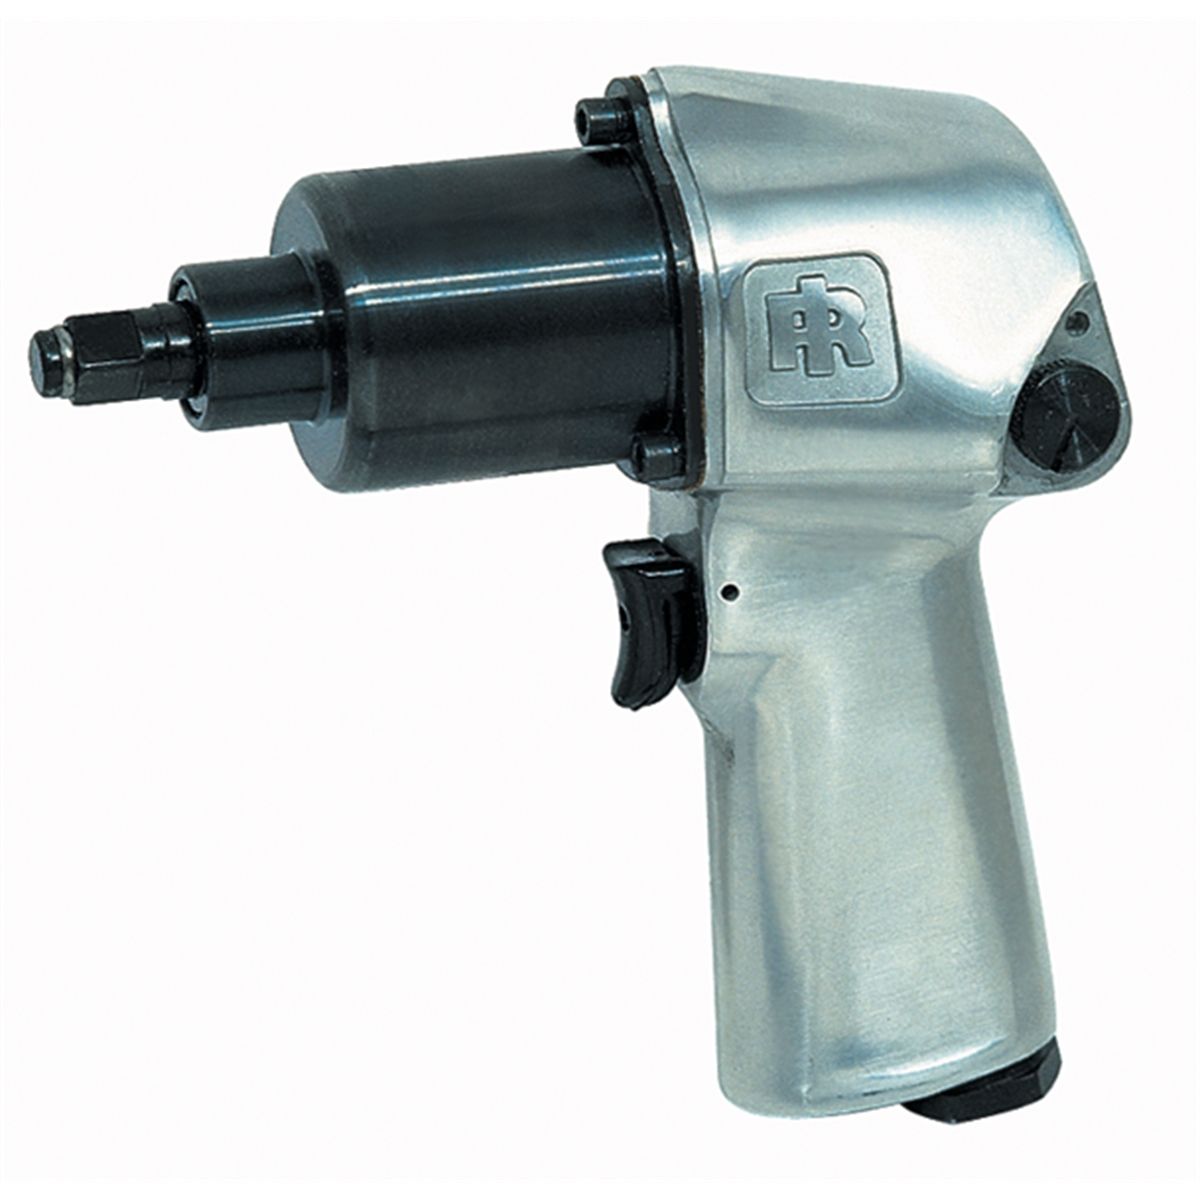 3/8 Inch Drive Super Duty Air Impact Wrench 180 ft-lbsIRT212 Fre